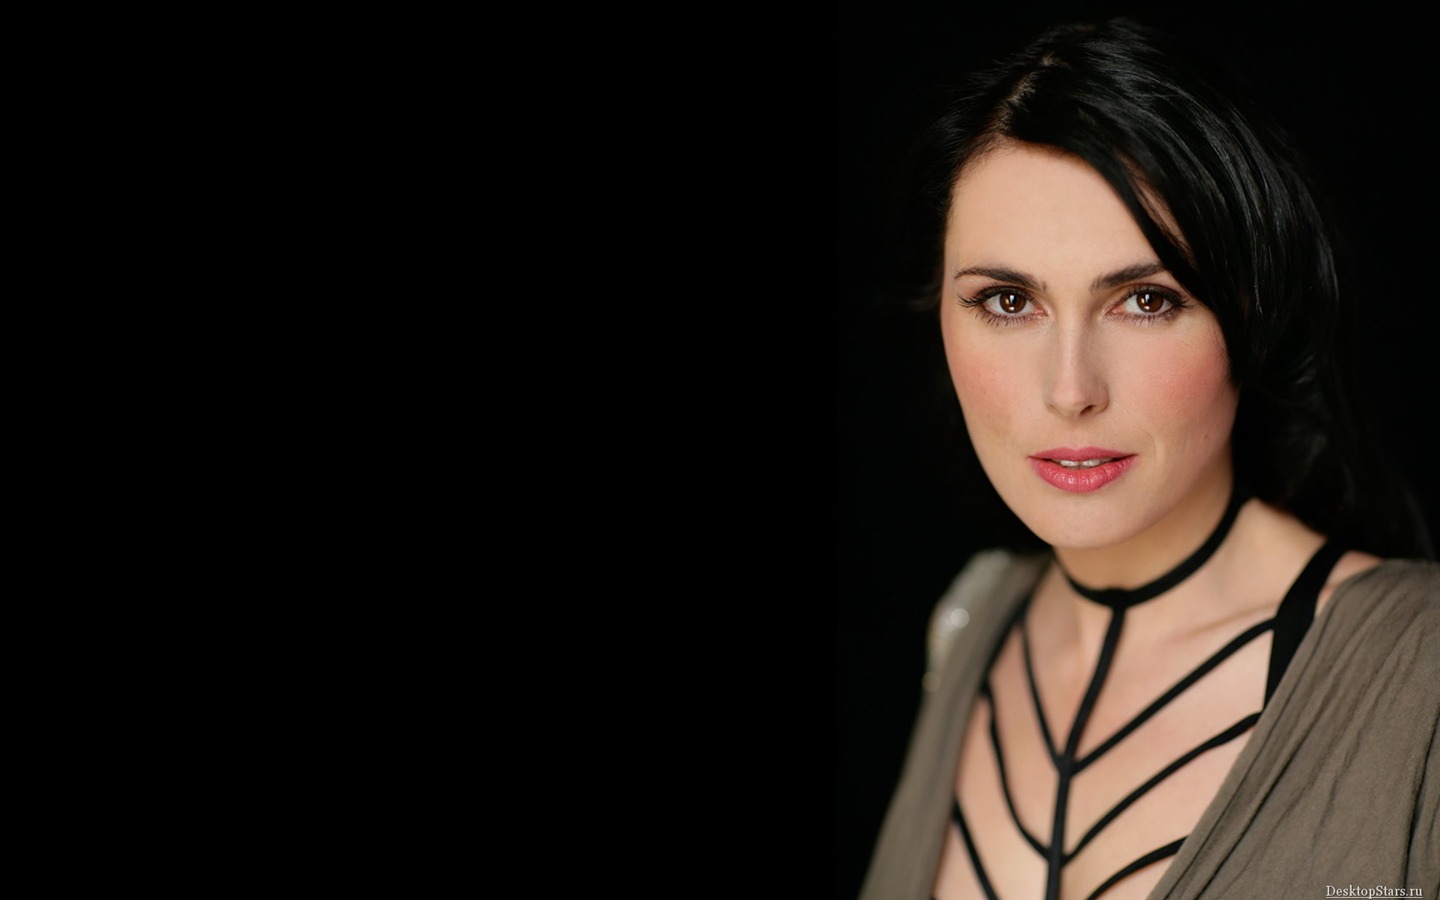 Sharon den Adel #005 - 1440x900 Wallpapers Pictures Photos Images